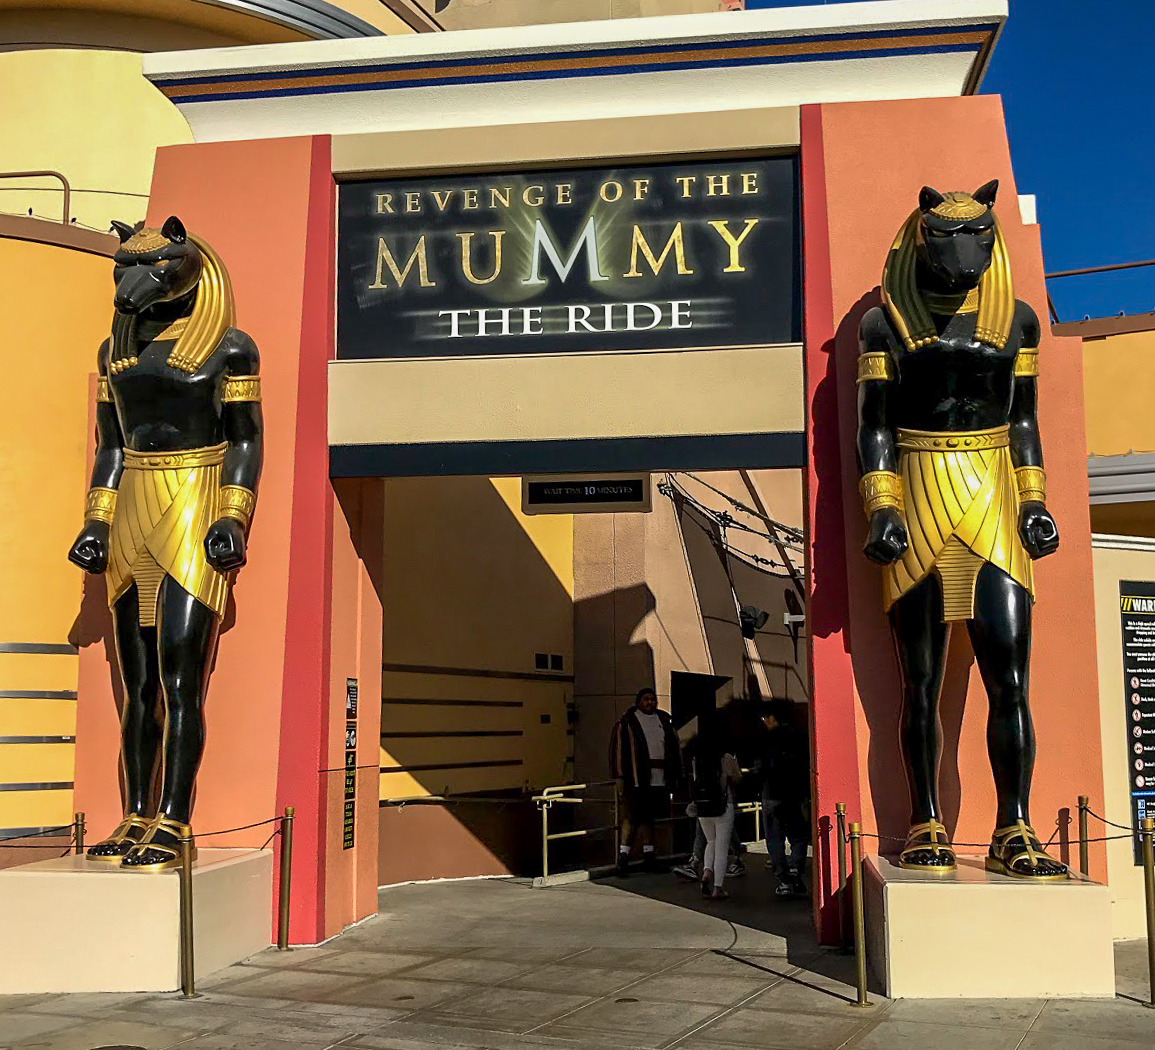 The entrance to Revenge of the Mummy - The Ride, flanked by two big Egyptian statues in Universal Studios Hollywood